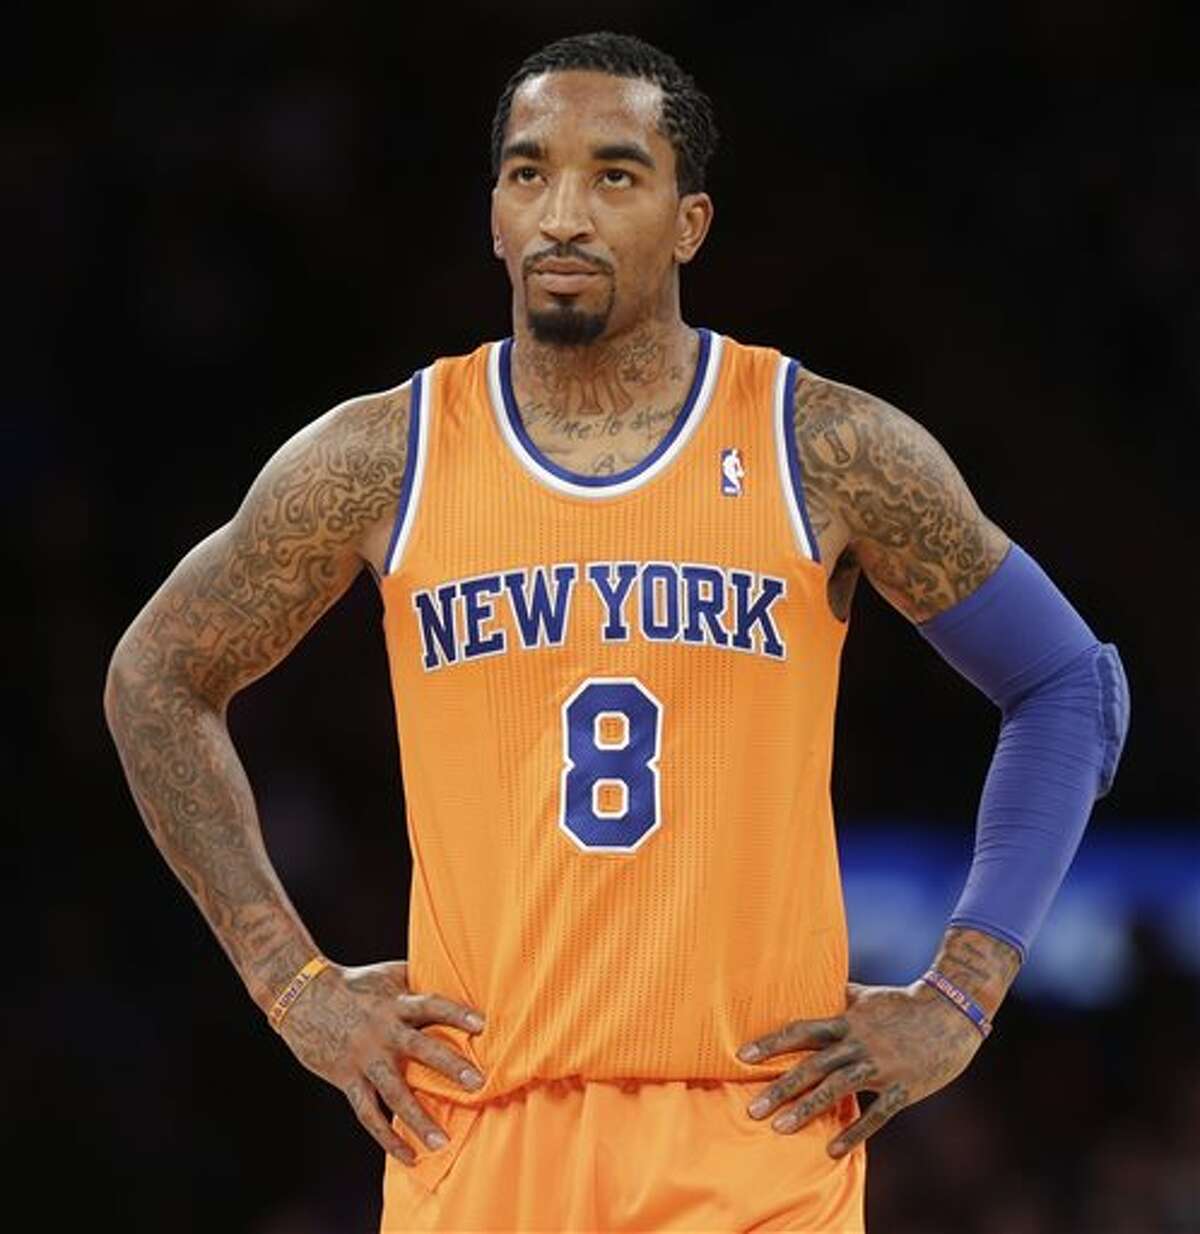 Knicks guard J.R. Smith suspended 5 games